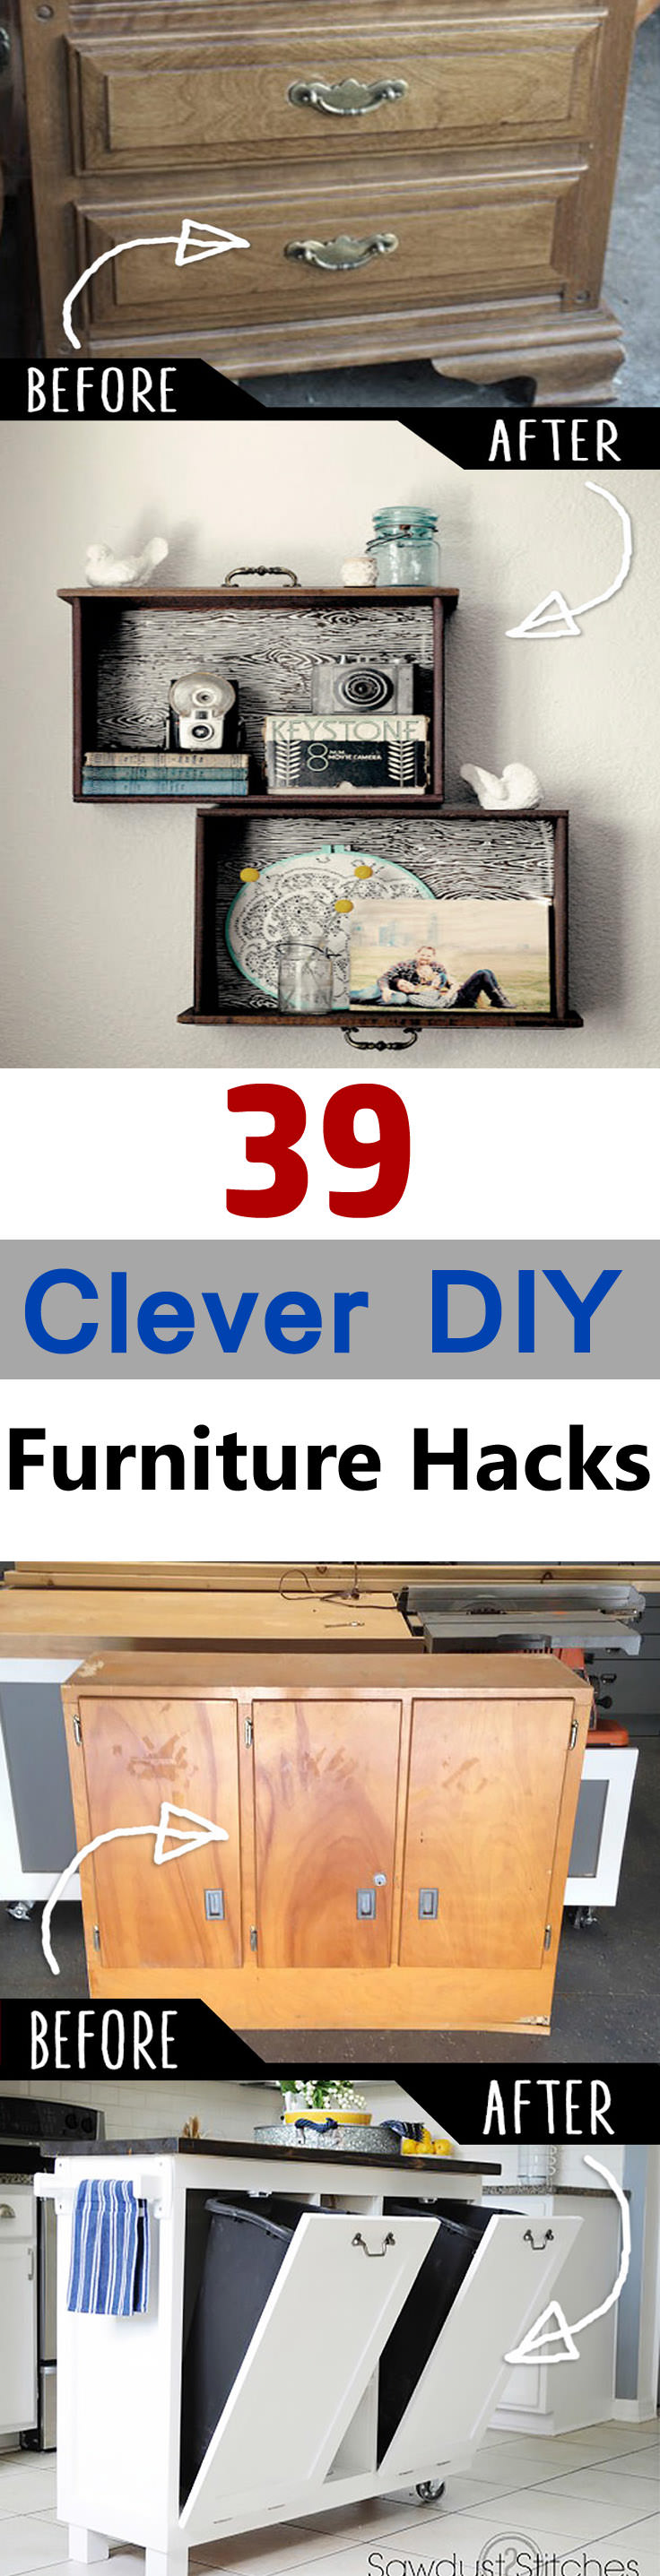 You'll definitely find these 39 clever DIY furniture hacks and ideas very interesting, once you see them.